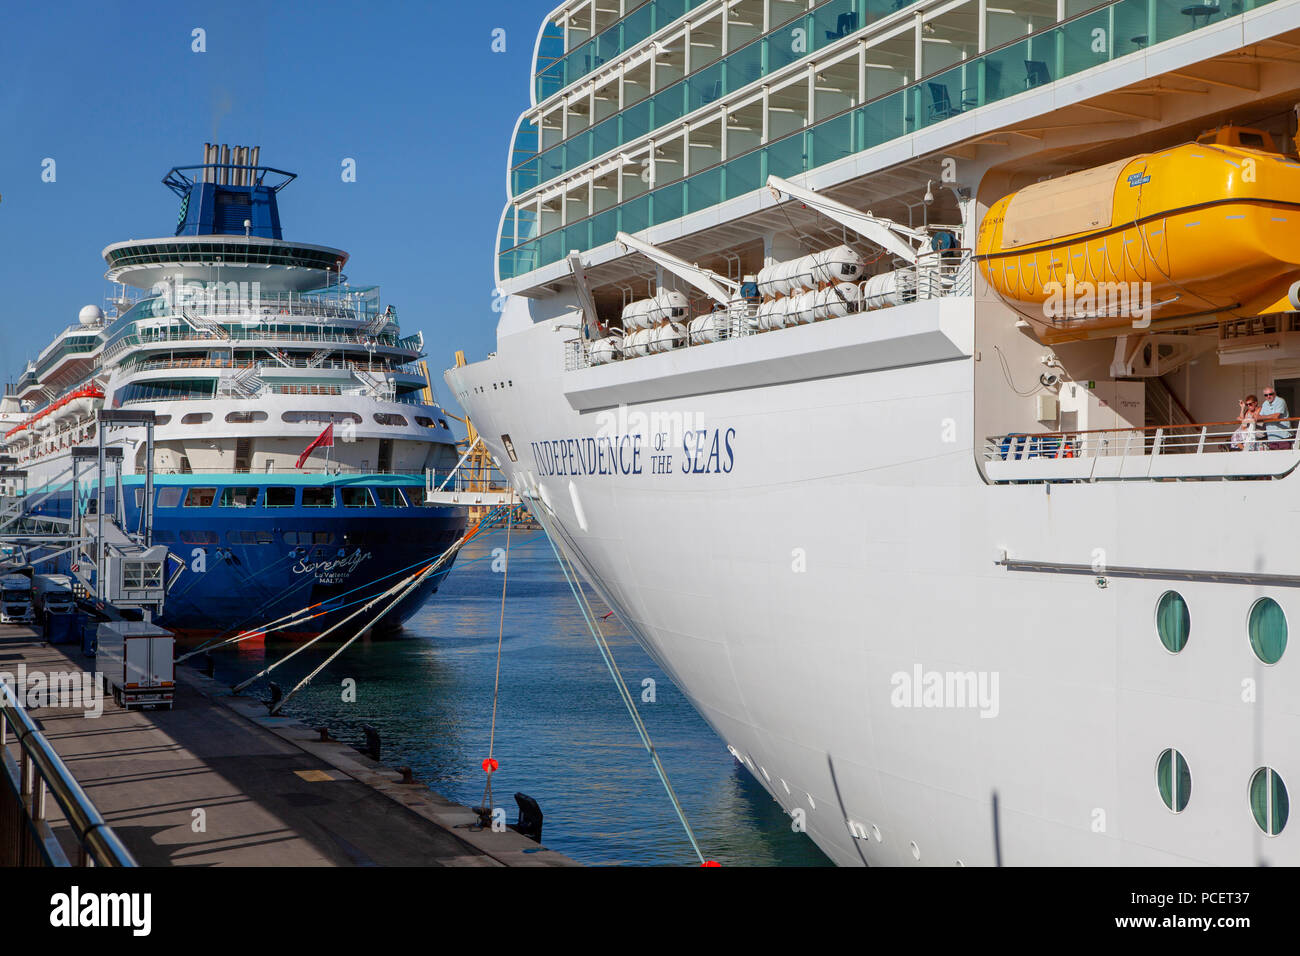 Independence of the Seas, a Freedom class cruise ship operated by the Royal Caribbean cruise line company in the Mediterranean Stock Photo